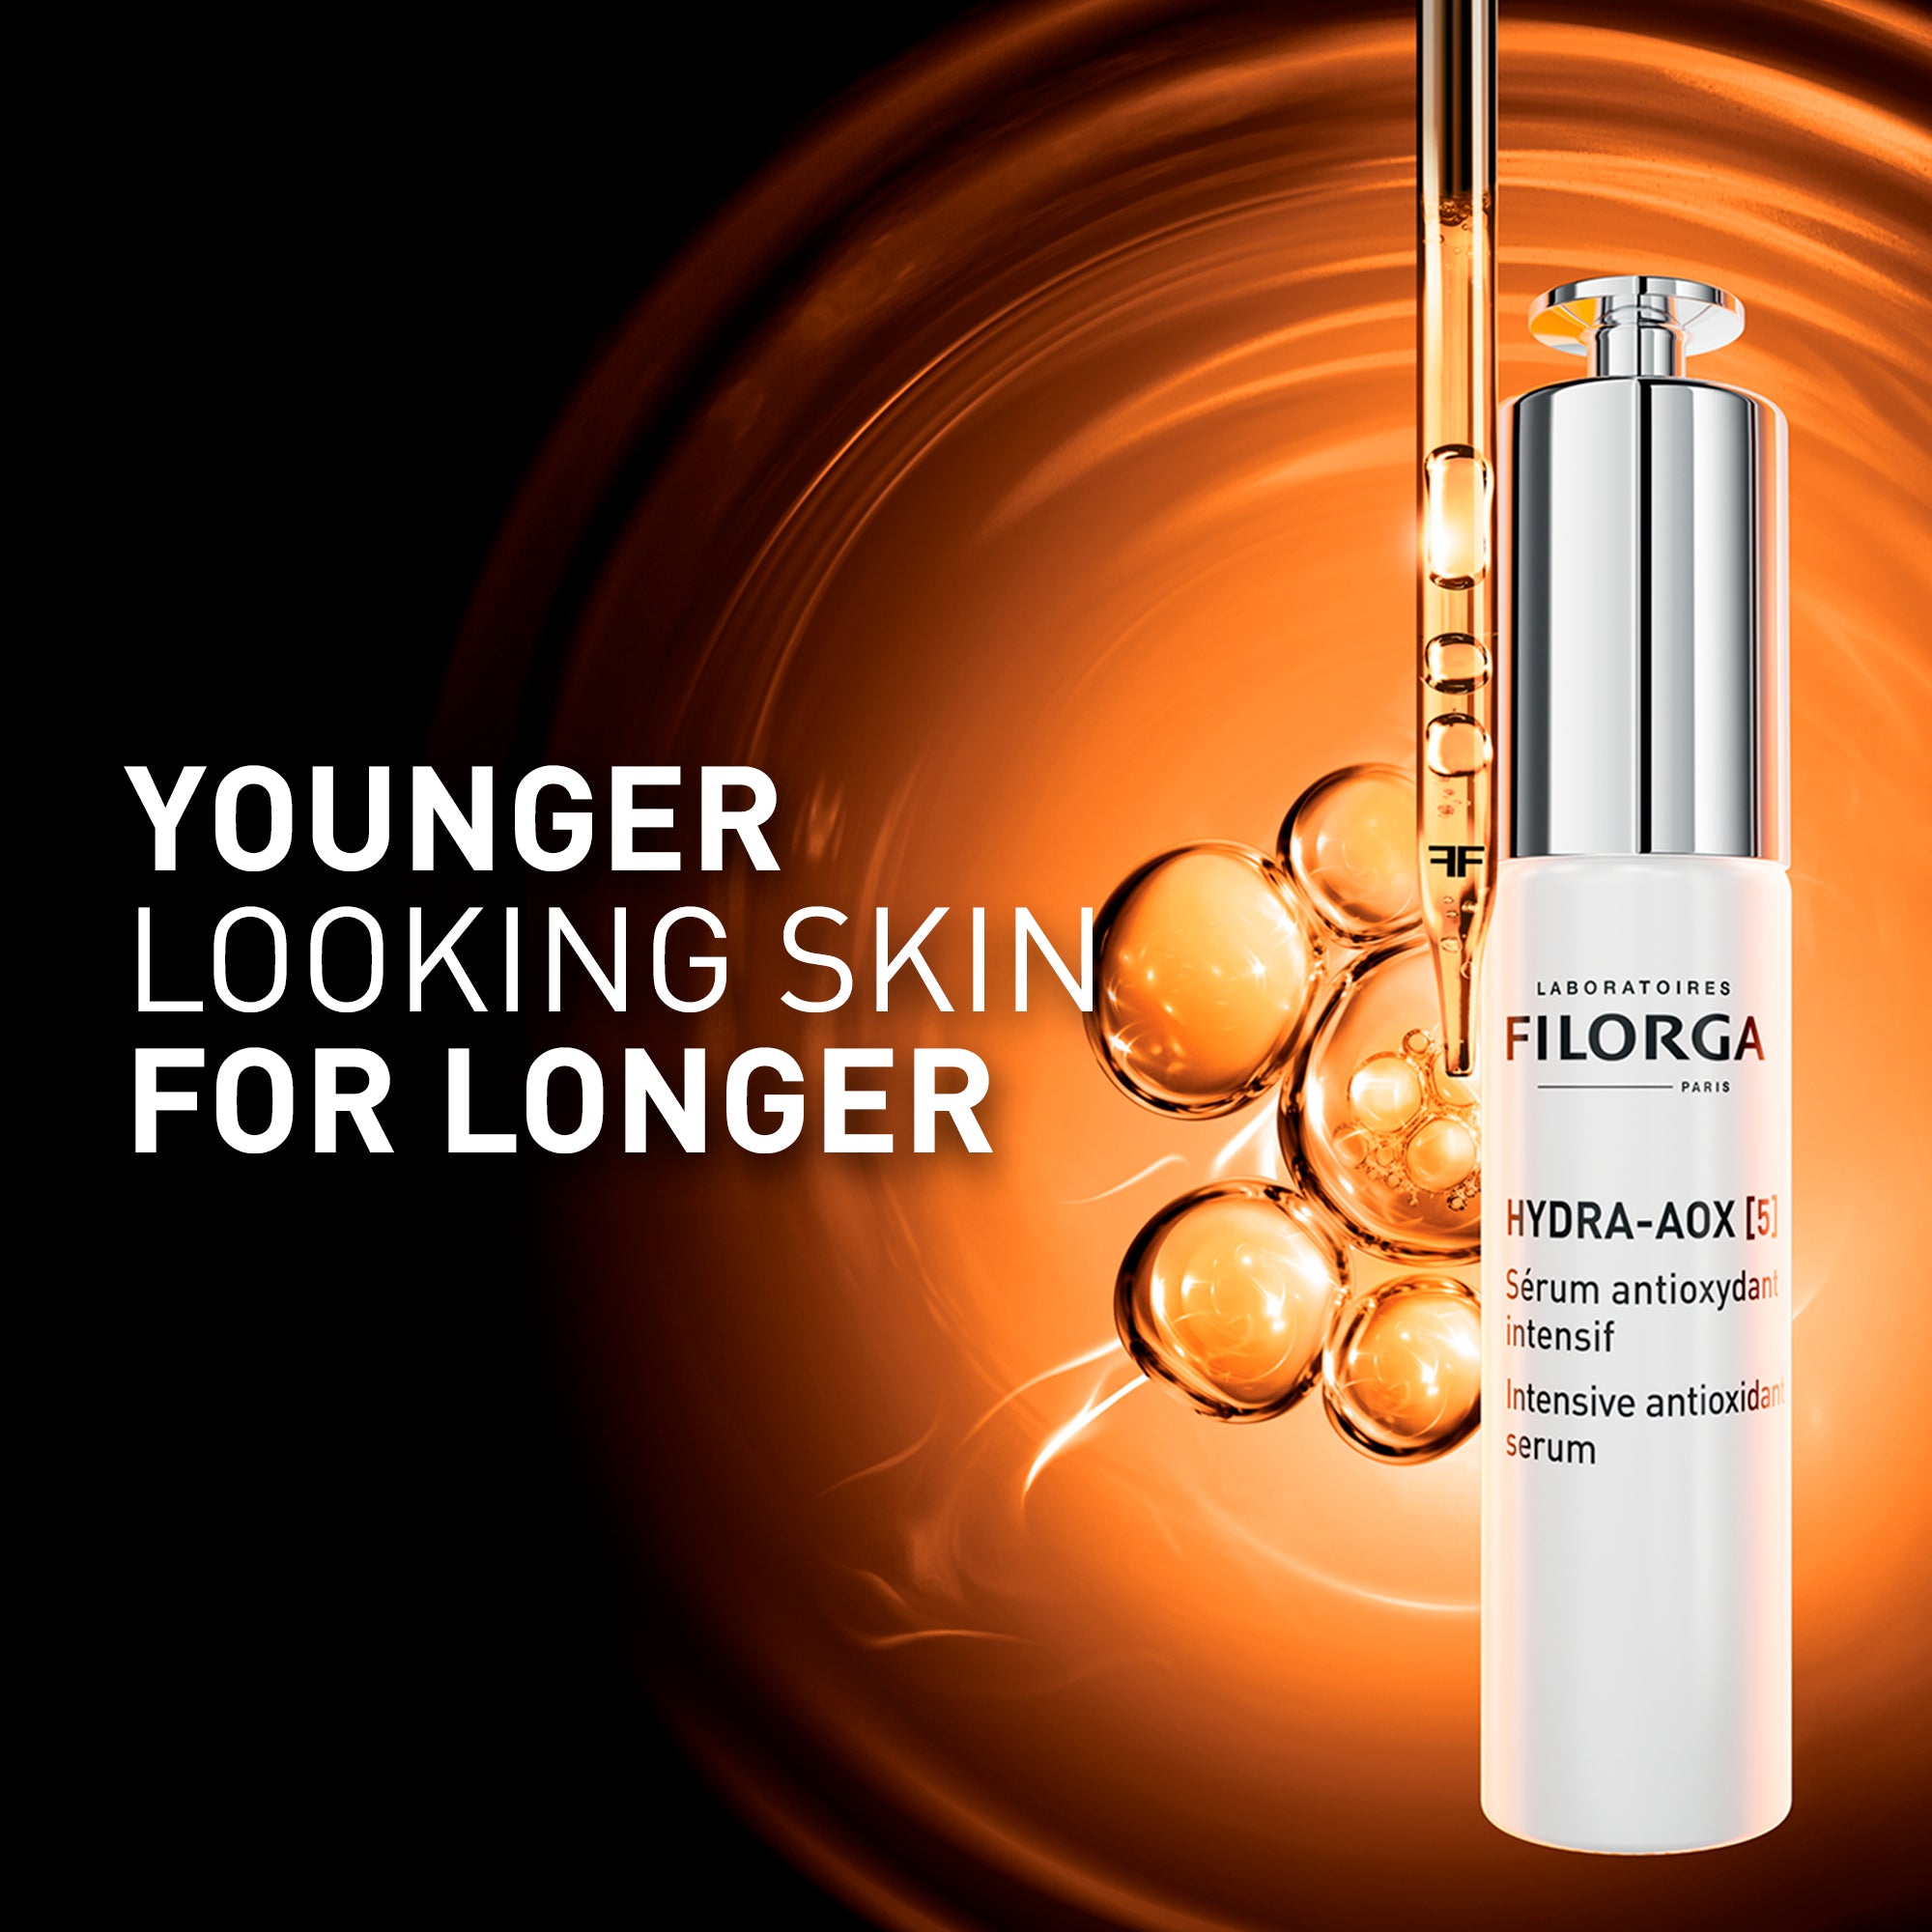 FILORGA HYDRA-AOX [5] - Younger looking skin for longer with bottle and dropper on orange background